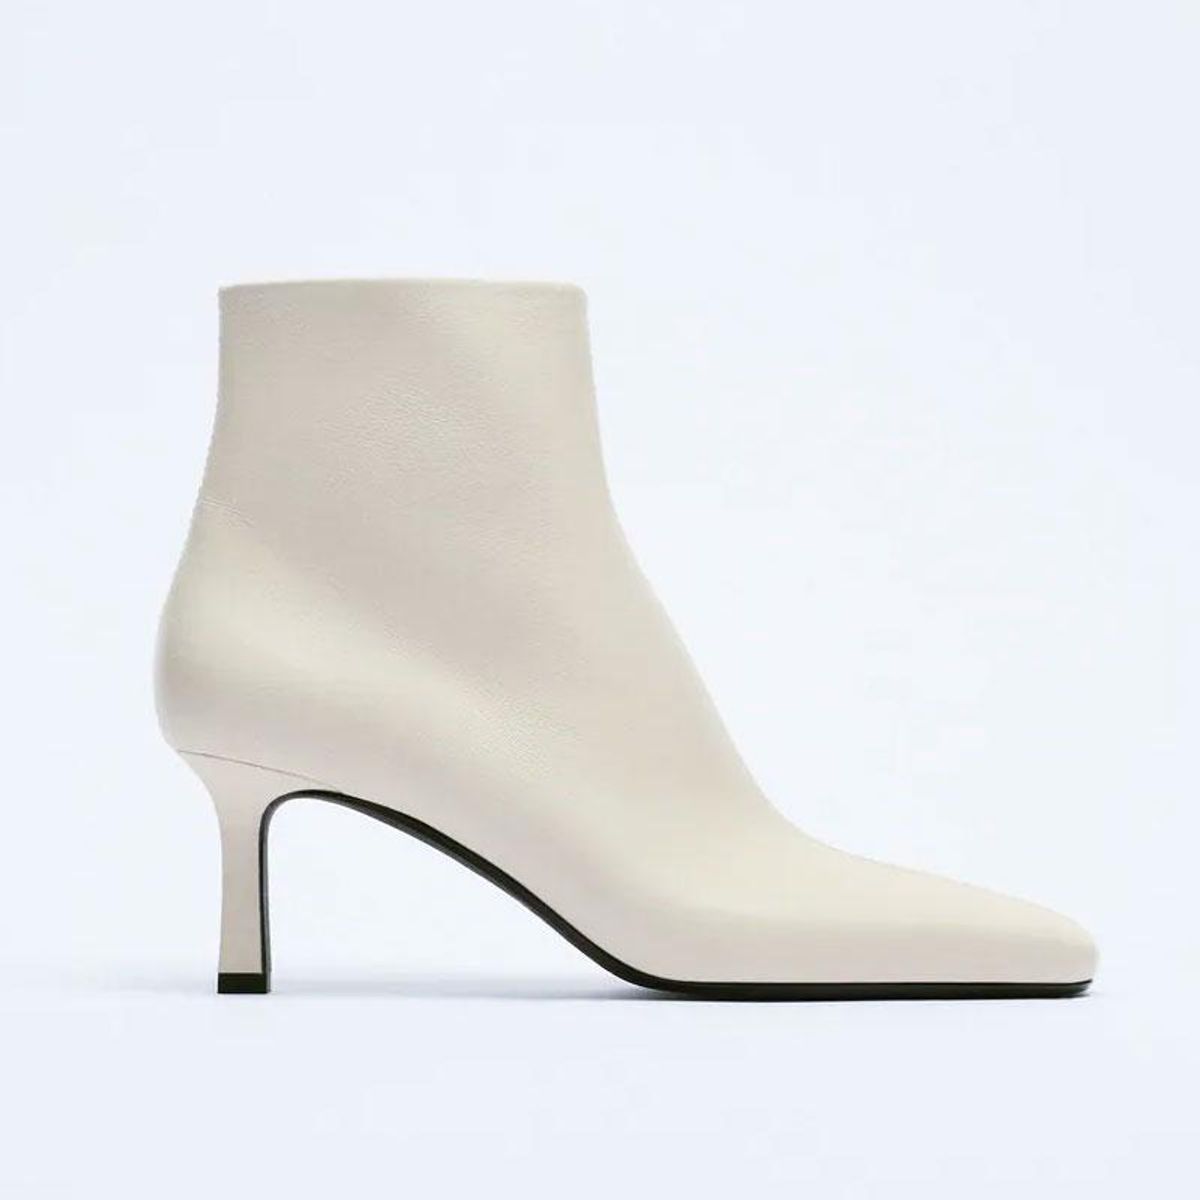 zara high heel leather ankle boot